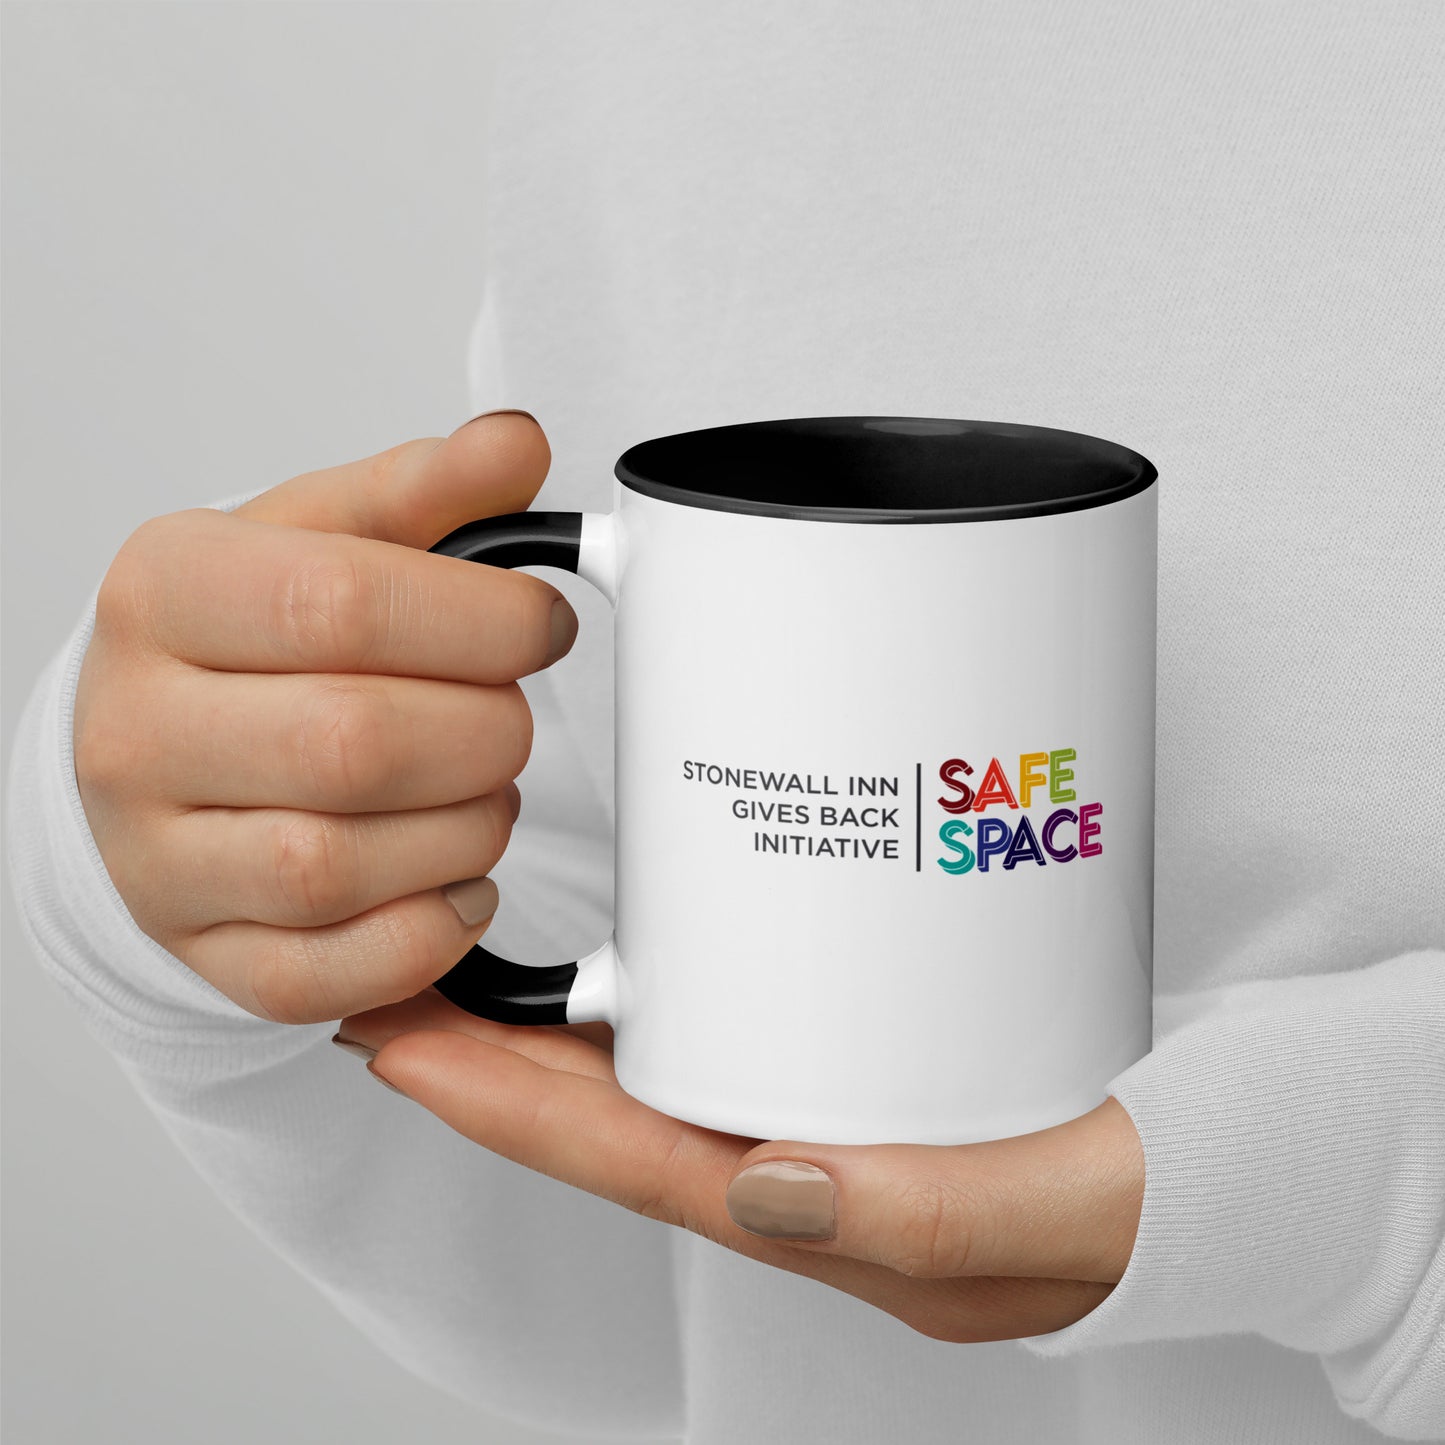 Safe Space Stonewall Inn Gives Back Initiative Mug with Black handle and inside